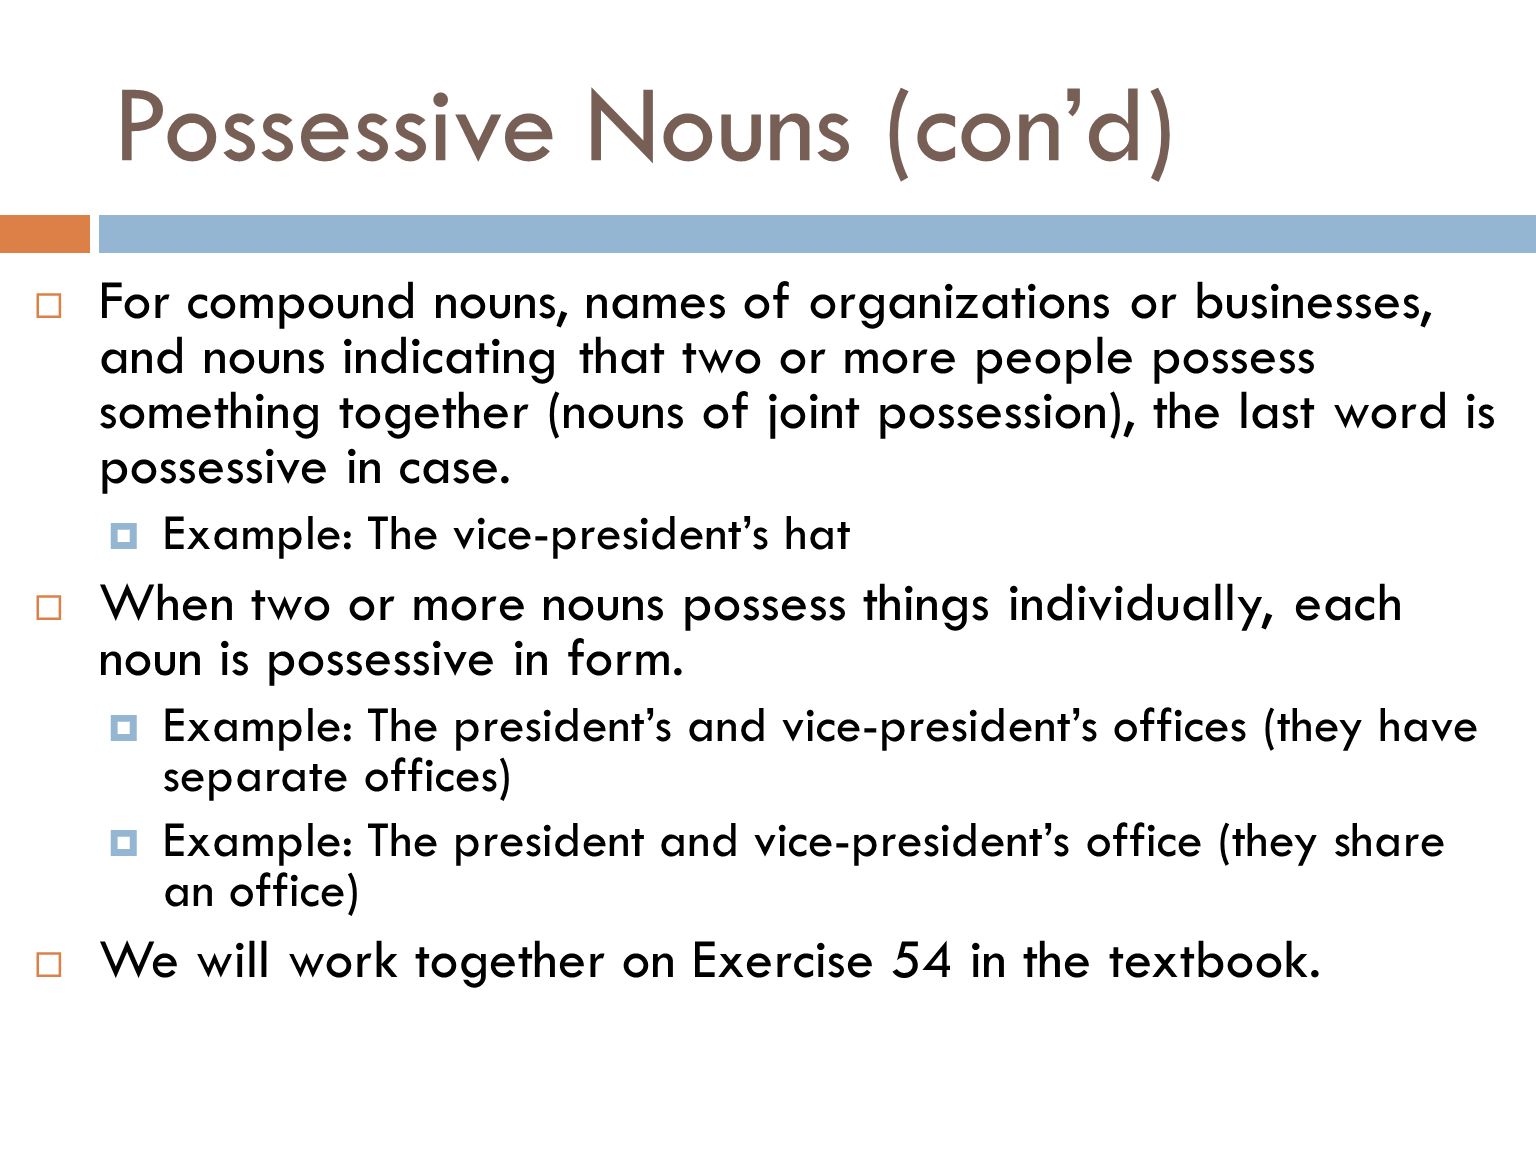 Possessive Nouns  Follow along on Textbook pages